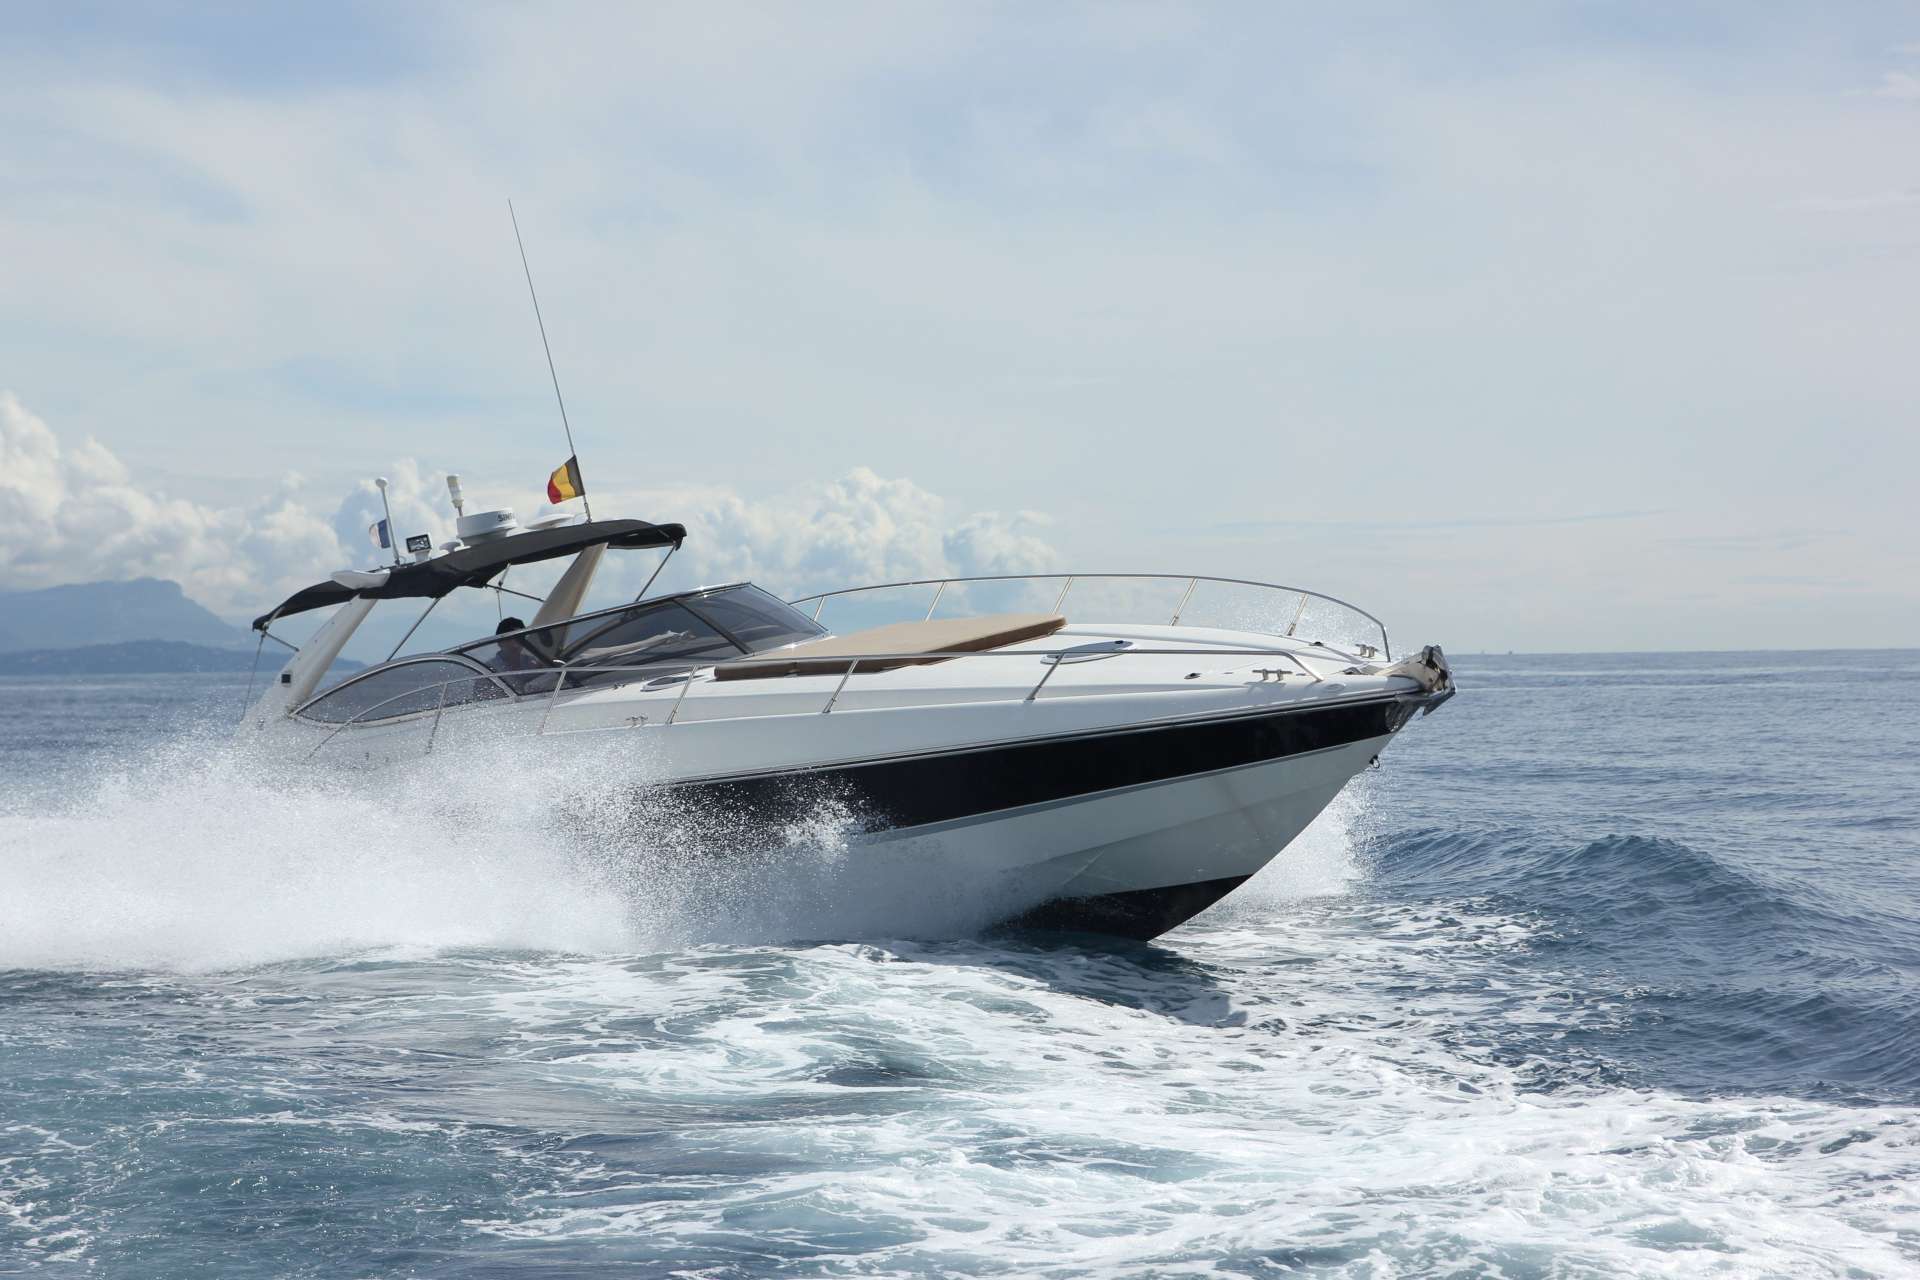 Sunseeker 48 - Luxury yacht charter France & Boat hire in France French Riviera Cannes Vieux port de Vallauris 6